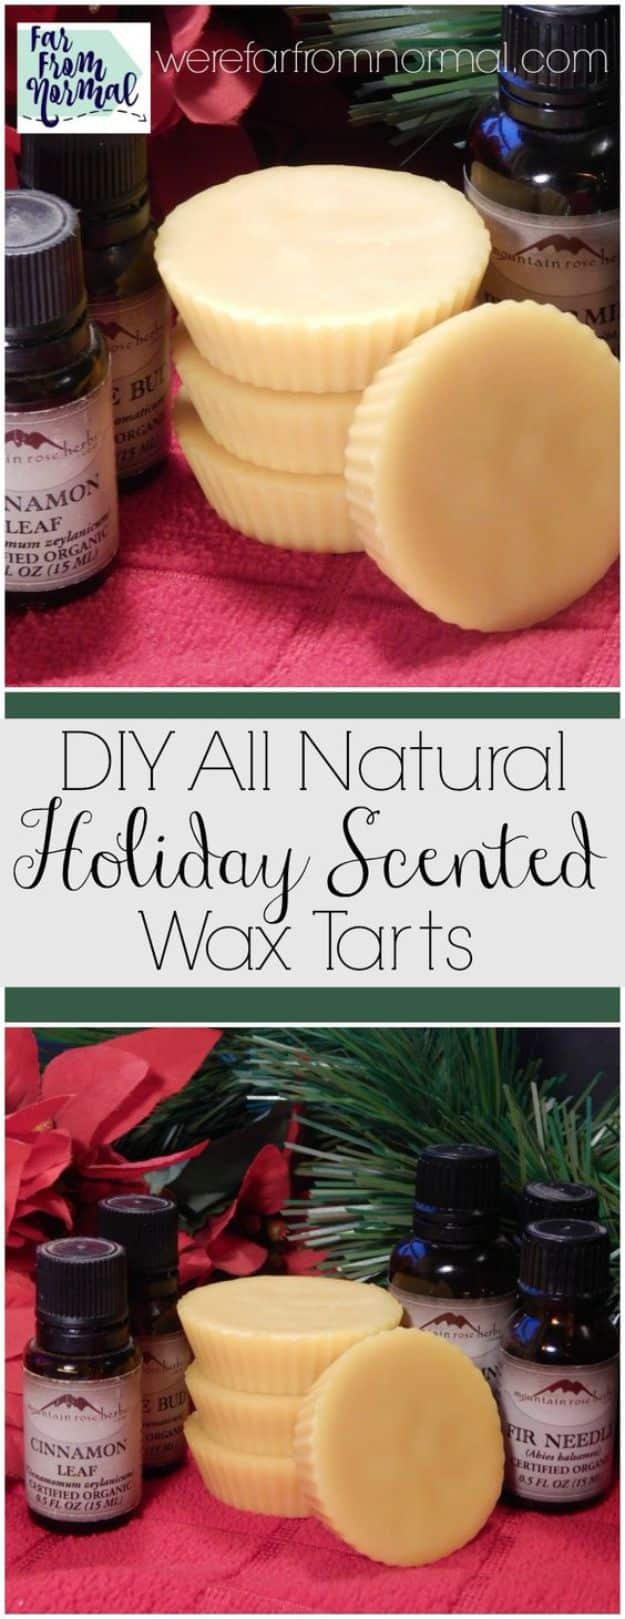 DIY Home Fragrance Ideas - All Natural Christmas Scented Wax Tarts - Easy Ways To Make your House and Home Smell Good - Essential Oils, Diffusers, DIY Lampe Berger Oil, Candles, Room Scents and Homemade Recipes for Odor Removal - Relaxing Lavender, Fresh Clean Smells, Lemon, Herb 